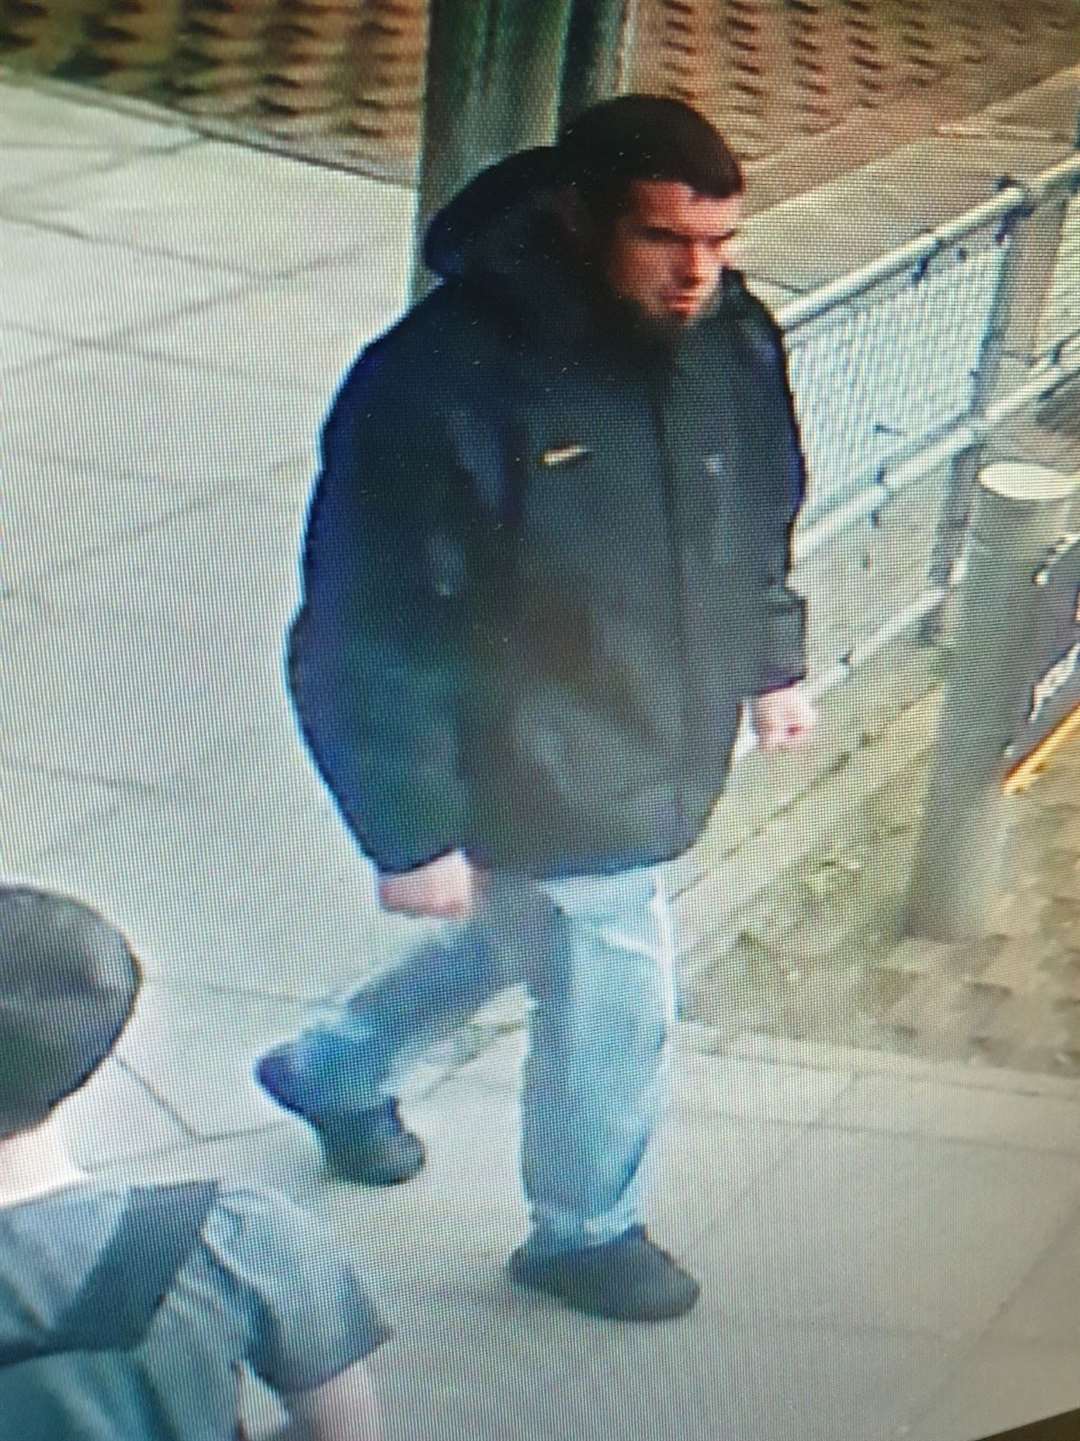 James Duncan was seen in Aberdeen city centre and is understood to have taken a bus to Ballater.